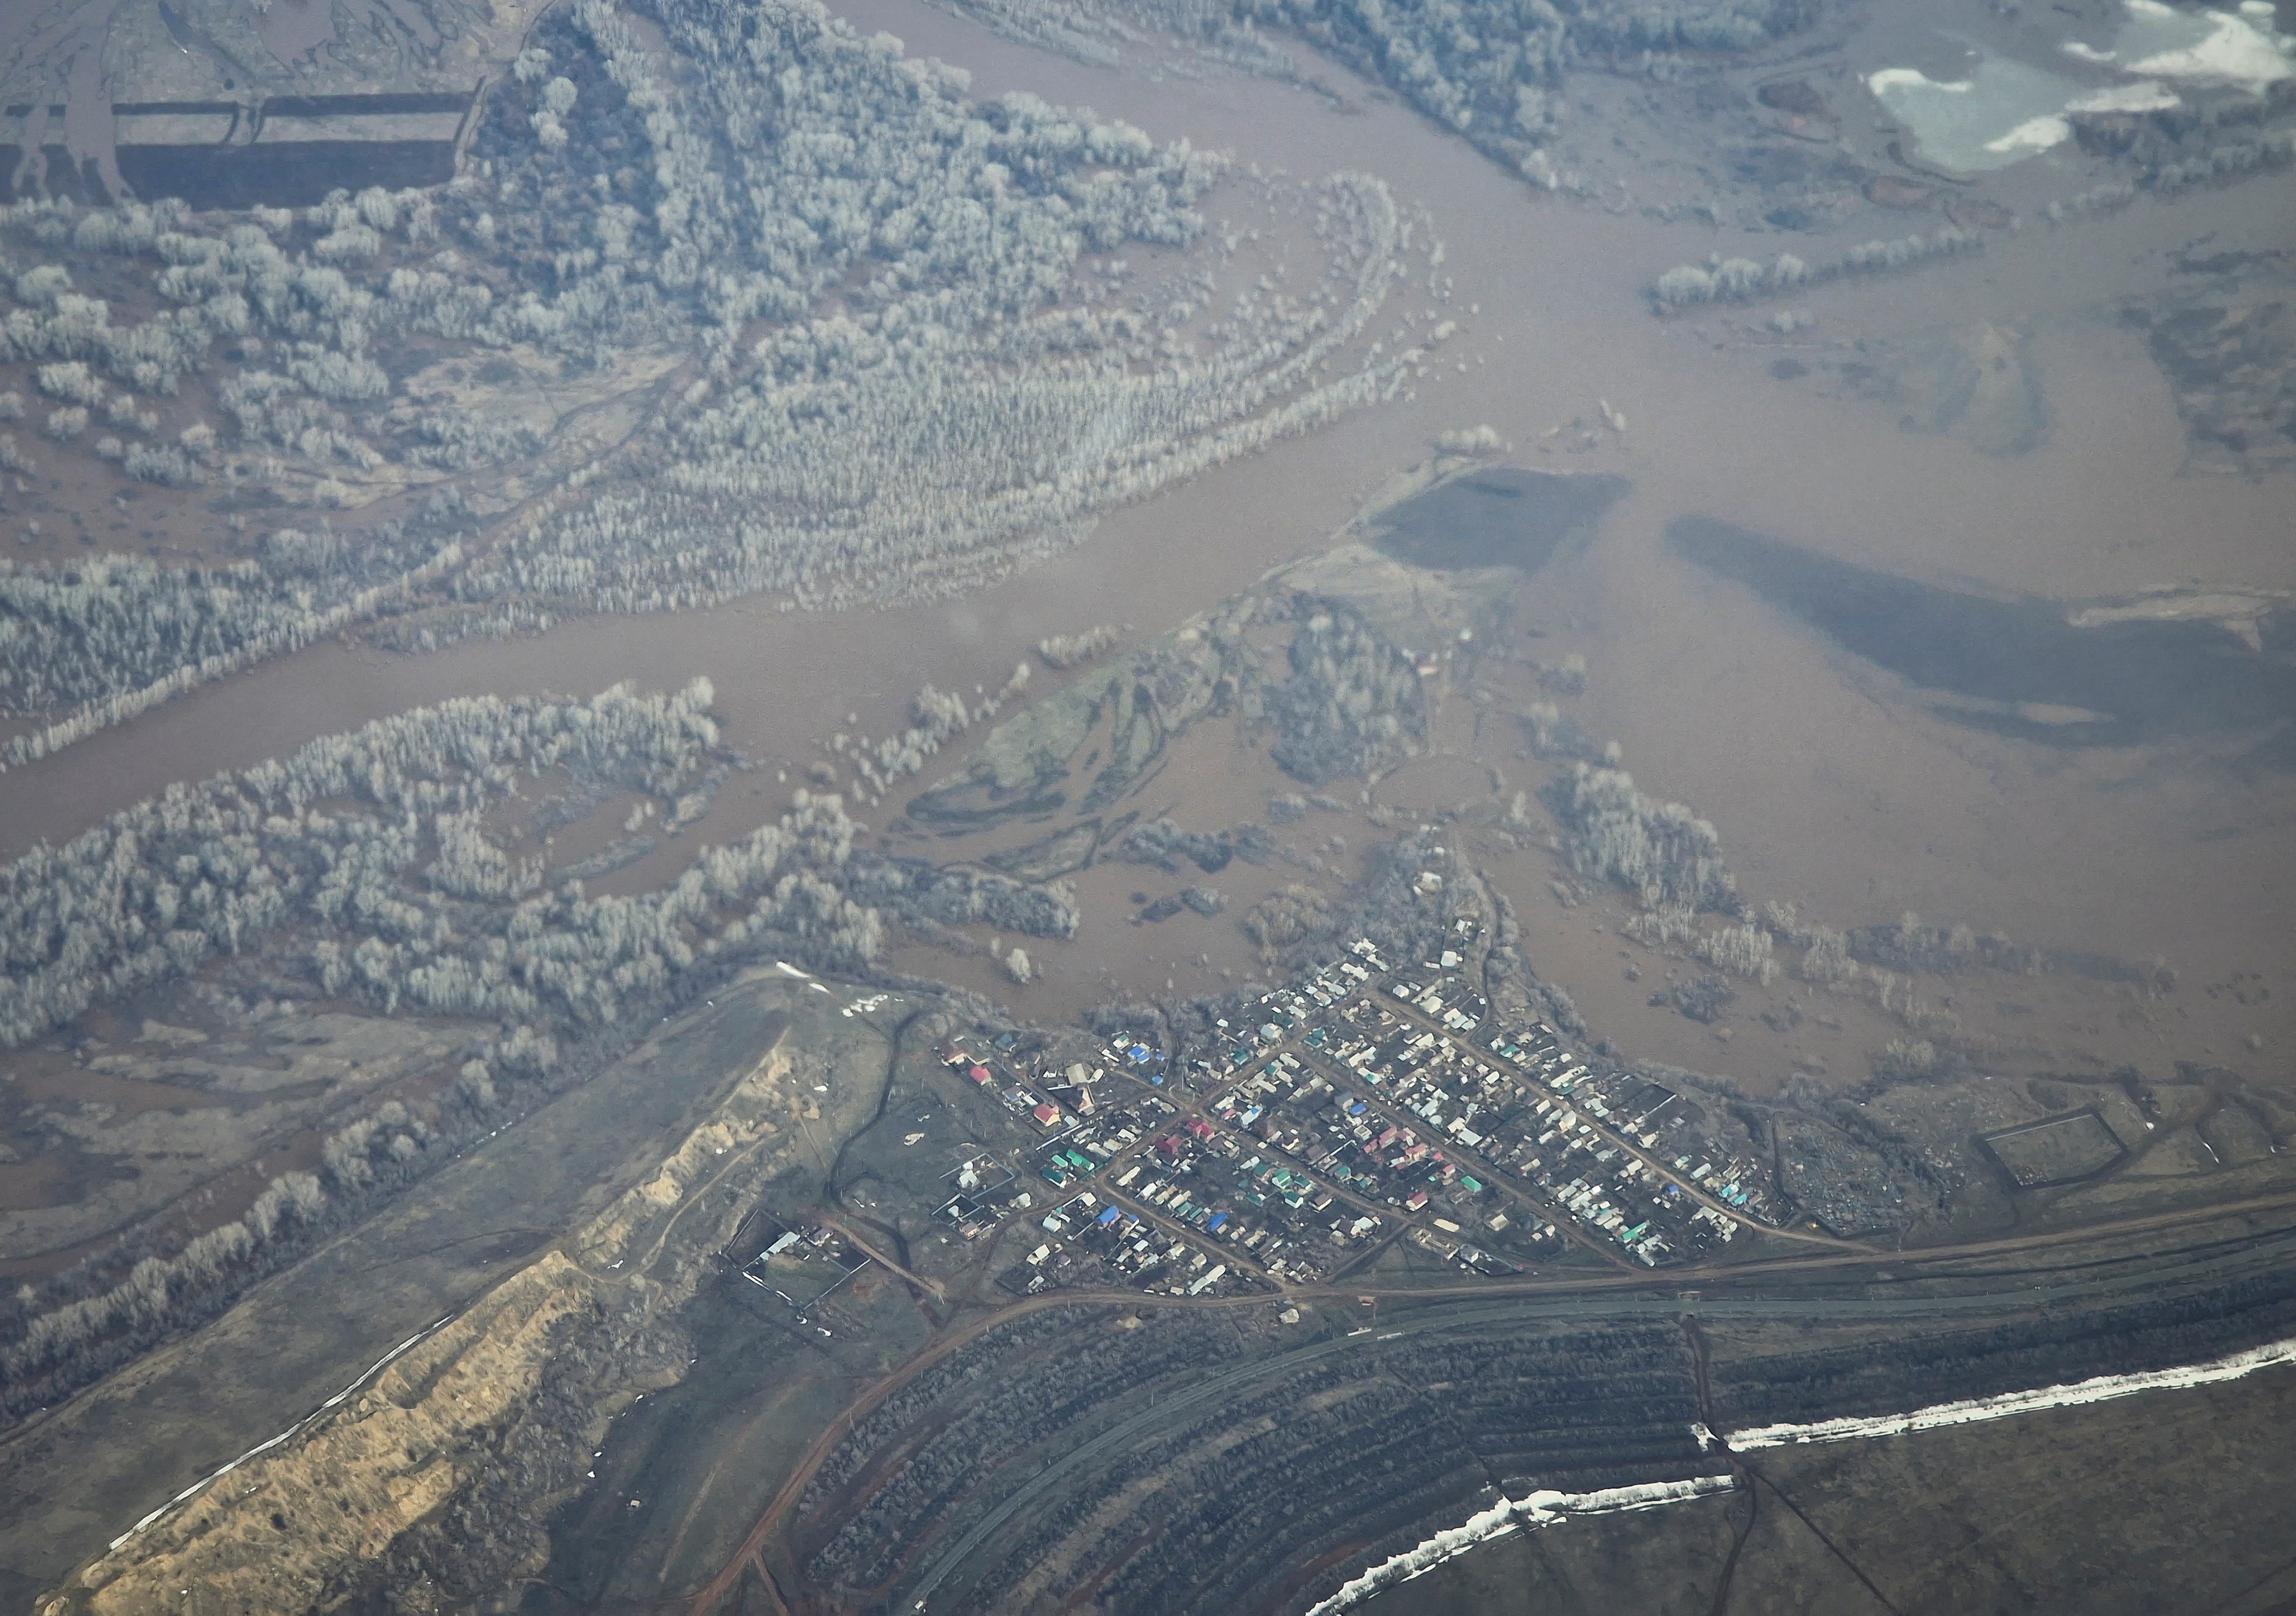 An aerial picture taken from a plane shows a flooded area near the city of Orenburg